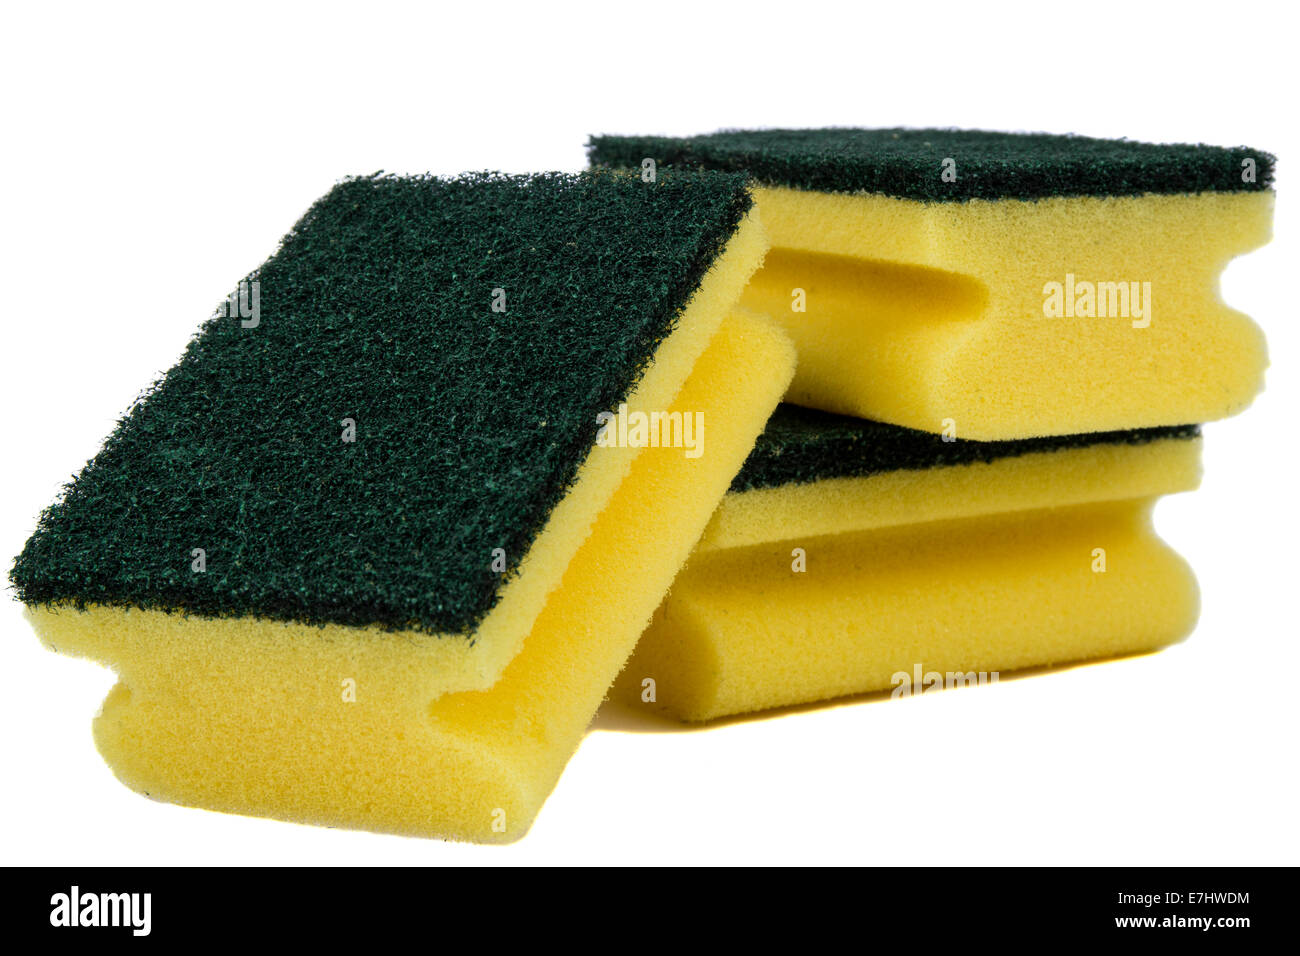 Yellow sponges for washing utensils isolated on a white background Stock Photo